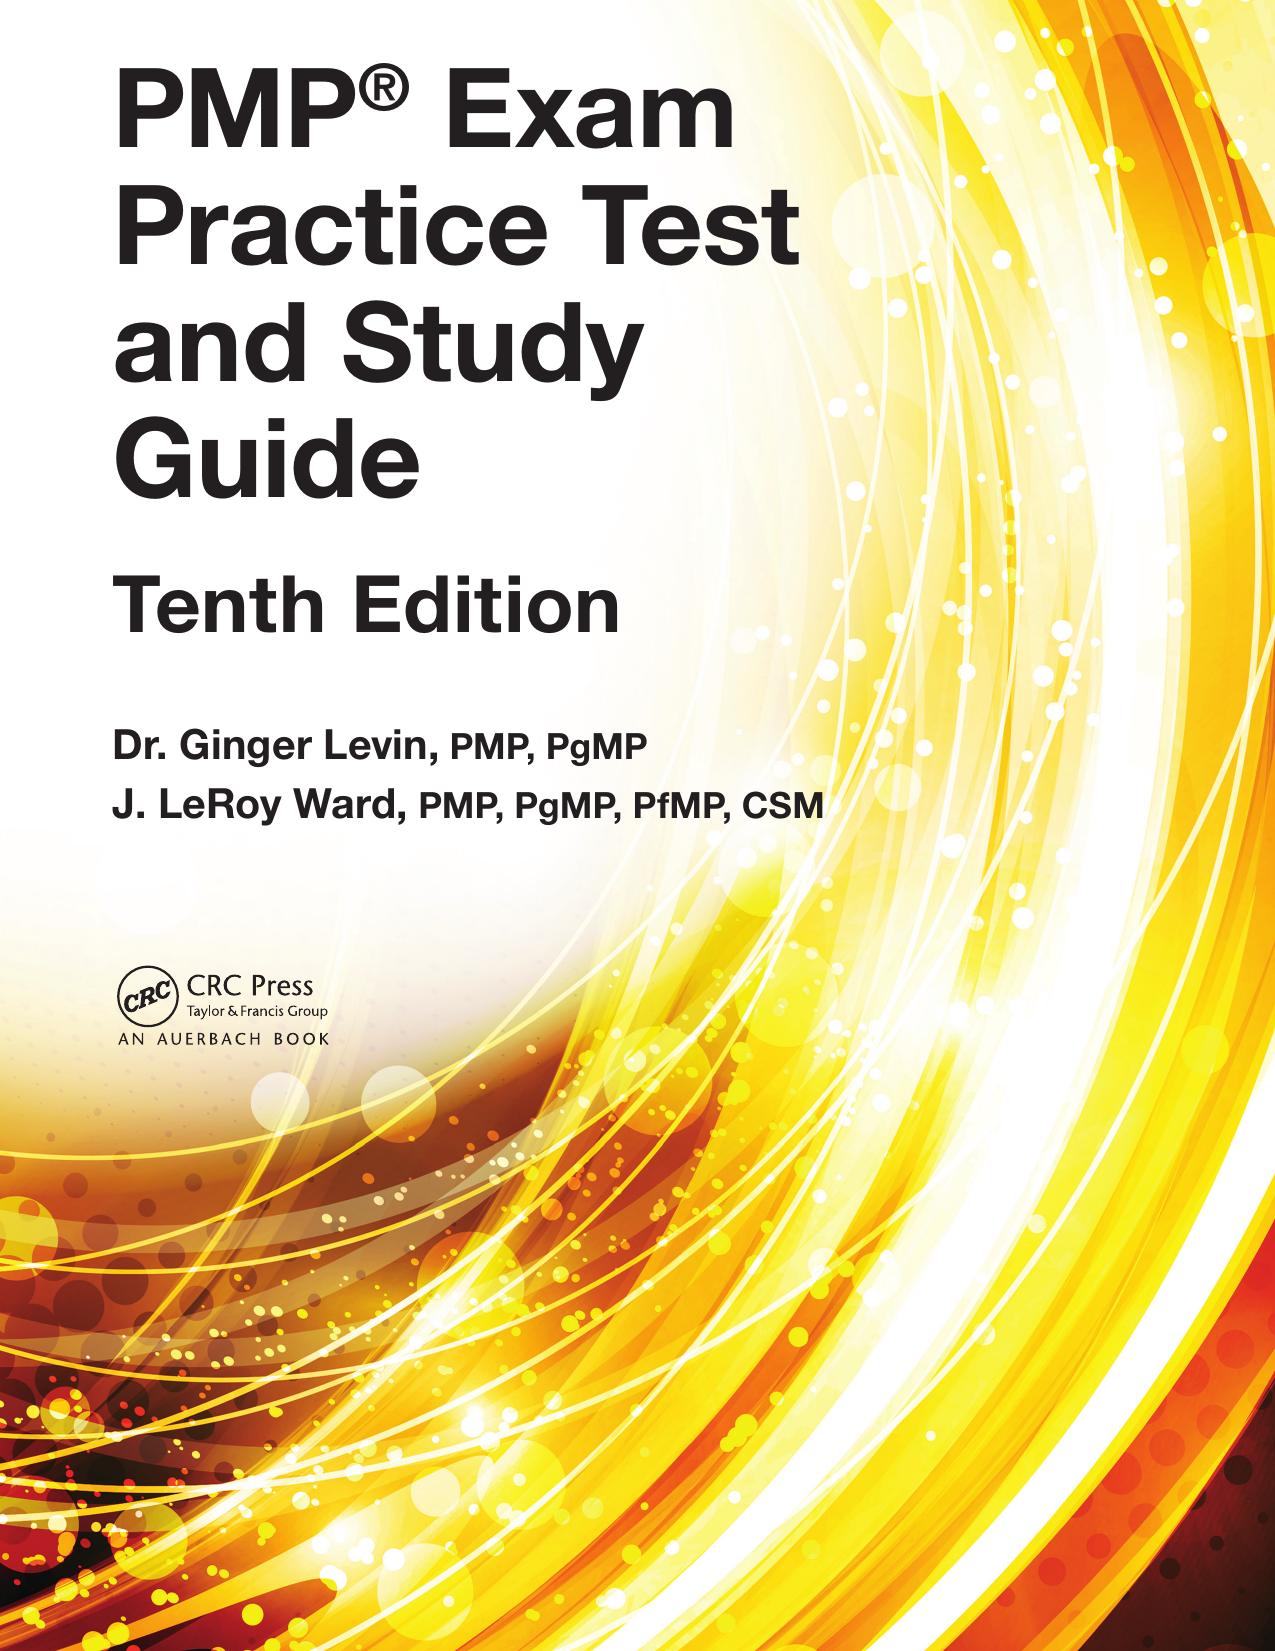 PMP® Exam Practice Test and Study Guide